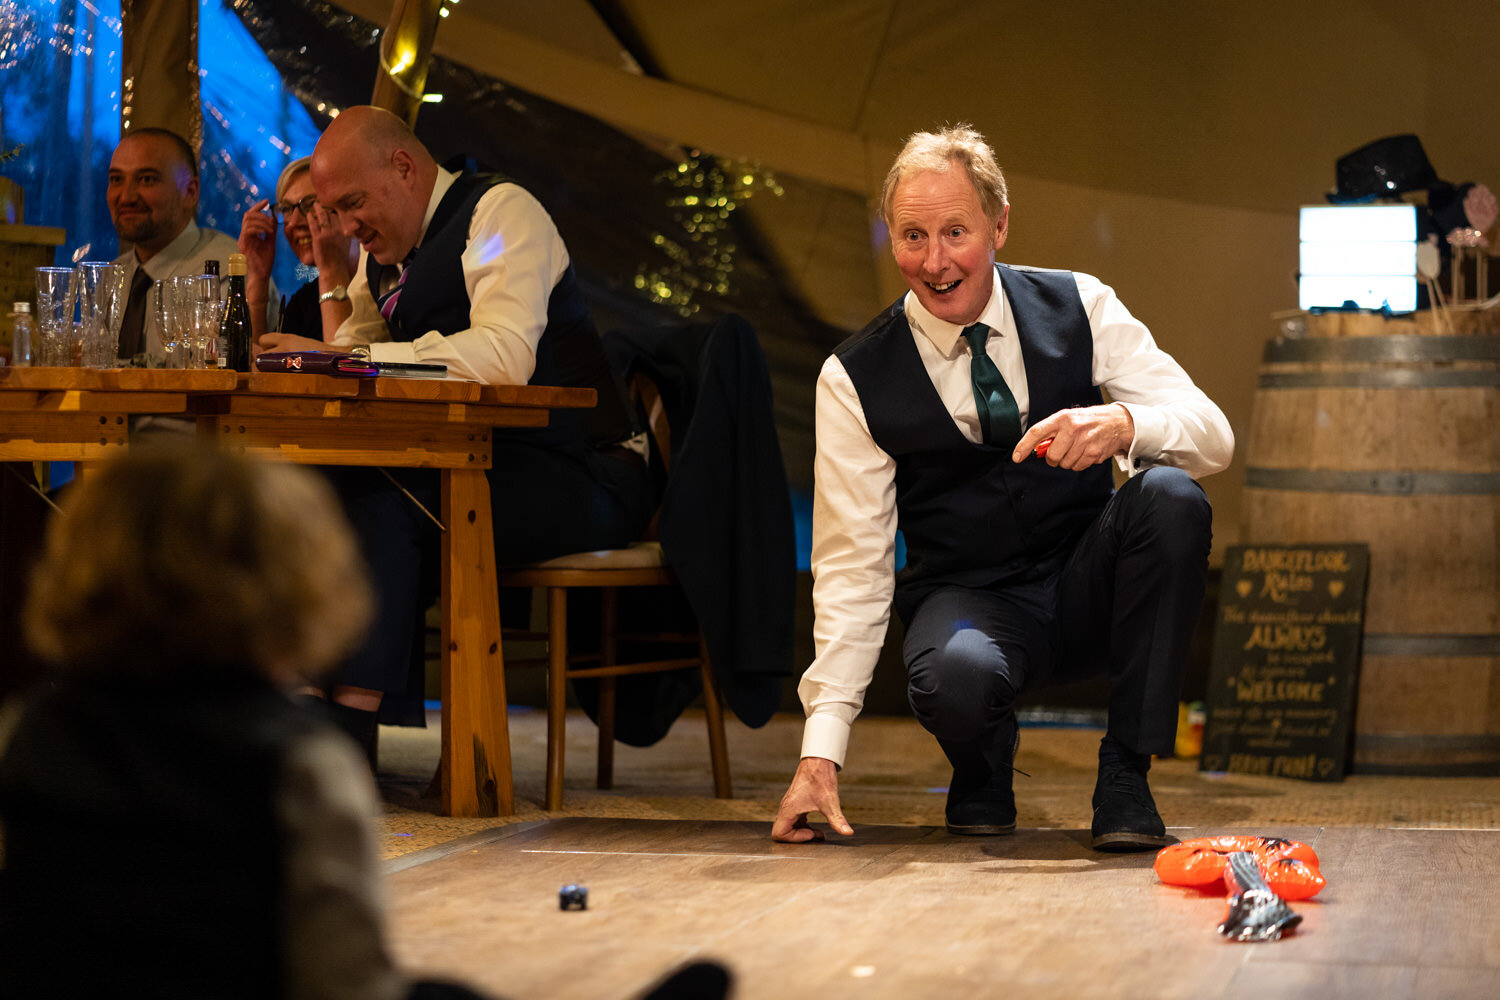 Father of bride playing with children at wedding reception